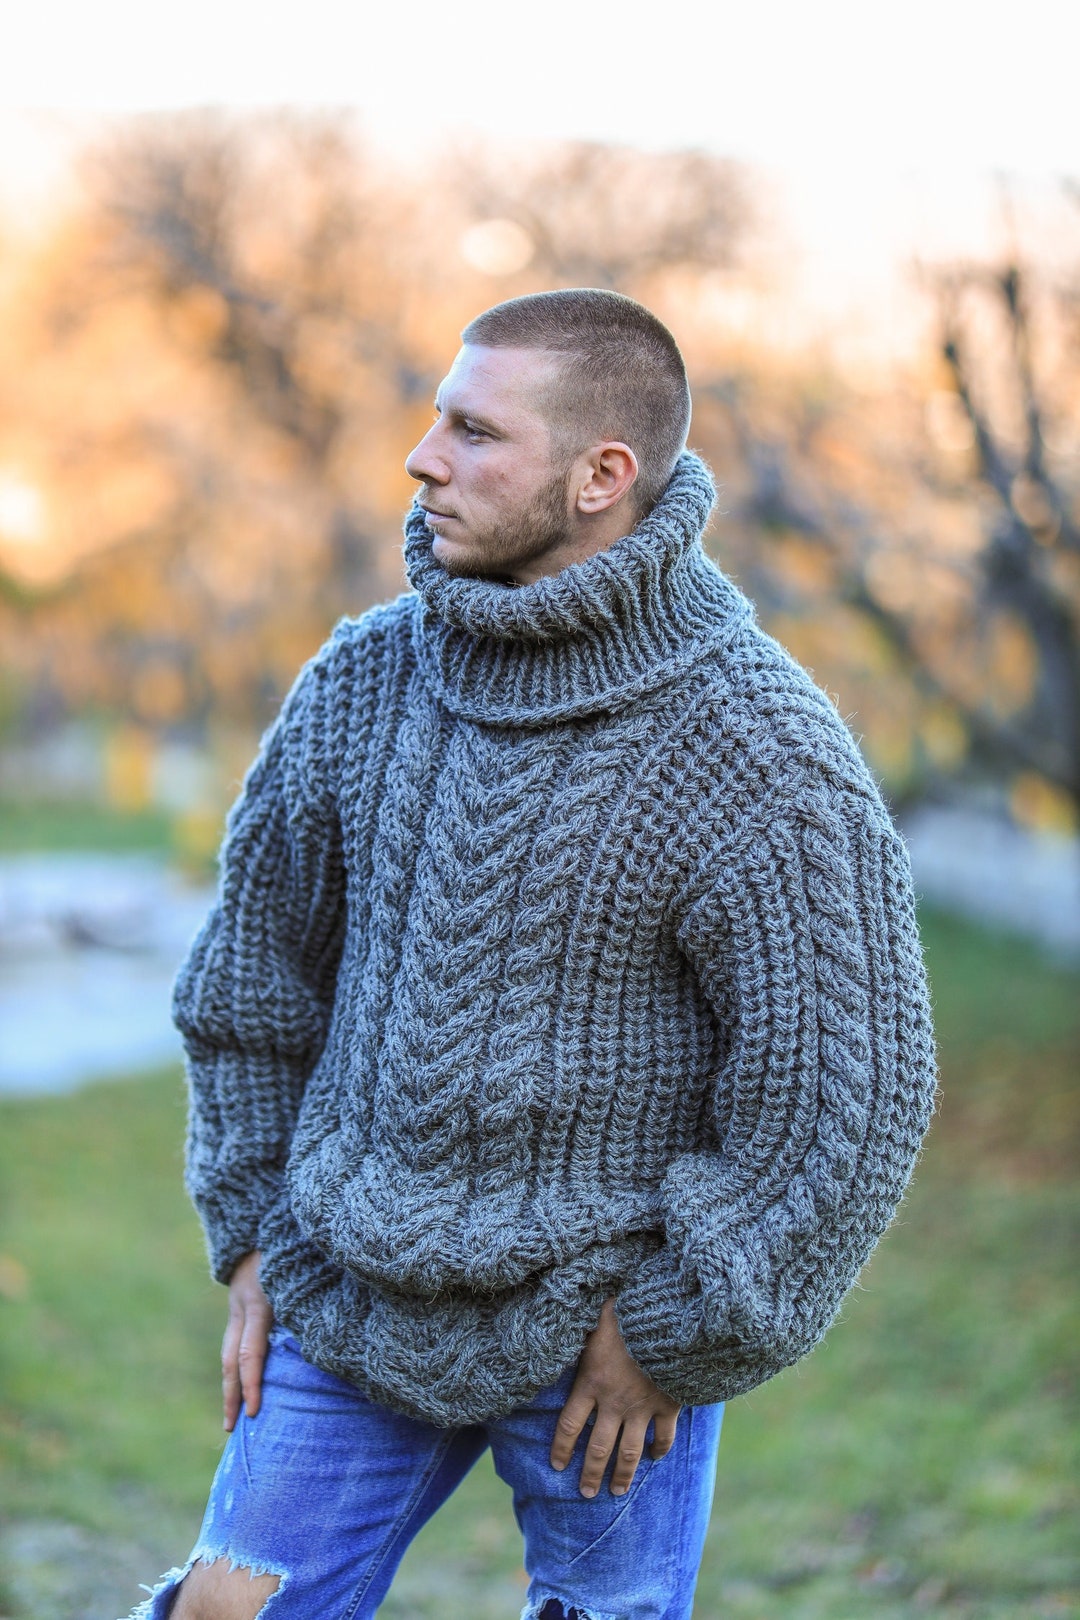 Wool Cable Knit Sweater, Man Sweater, Winter Man Clothing, Giant Turtleneck  Pullover, Warm Wool Blouse, Oversized Sweater,ski Resort Sweater 